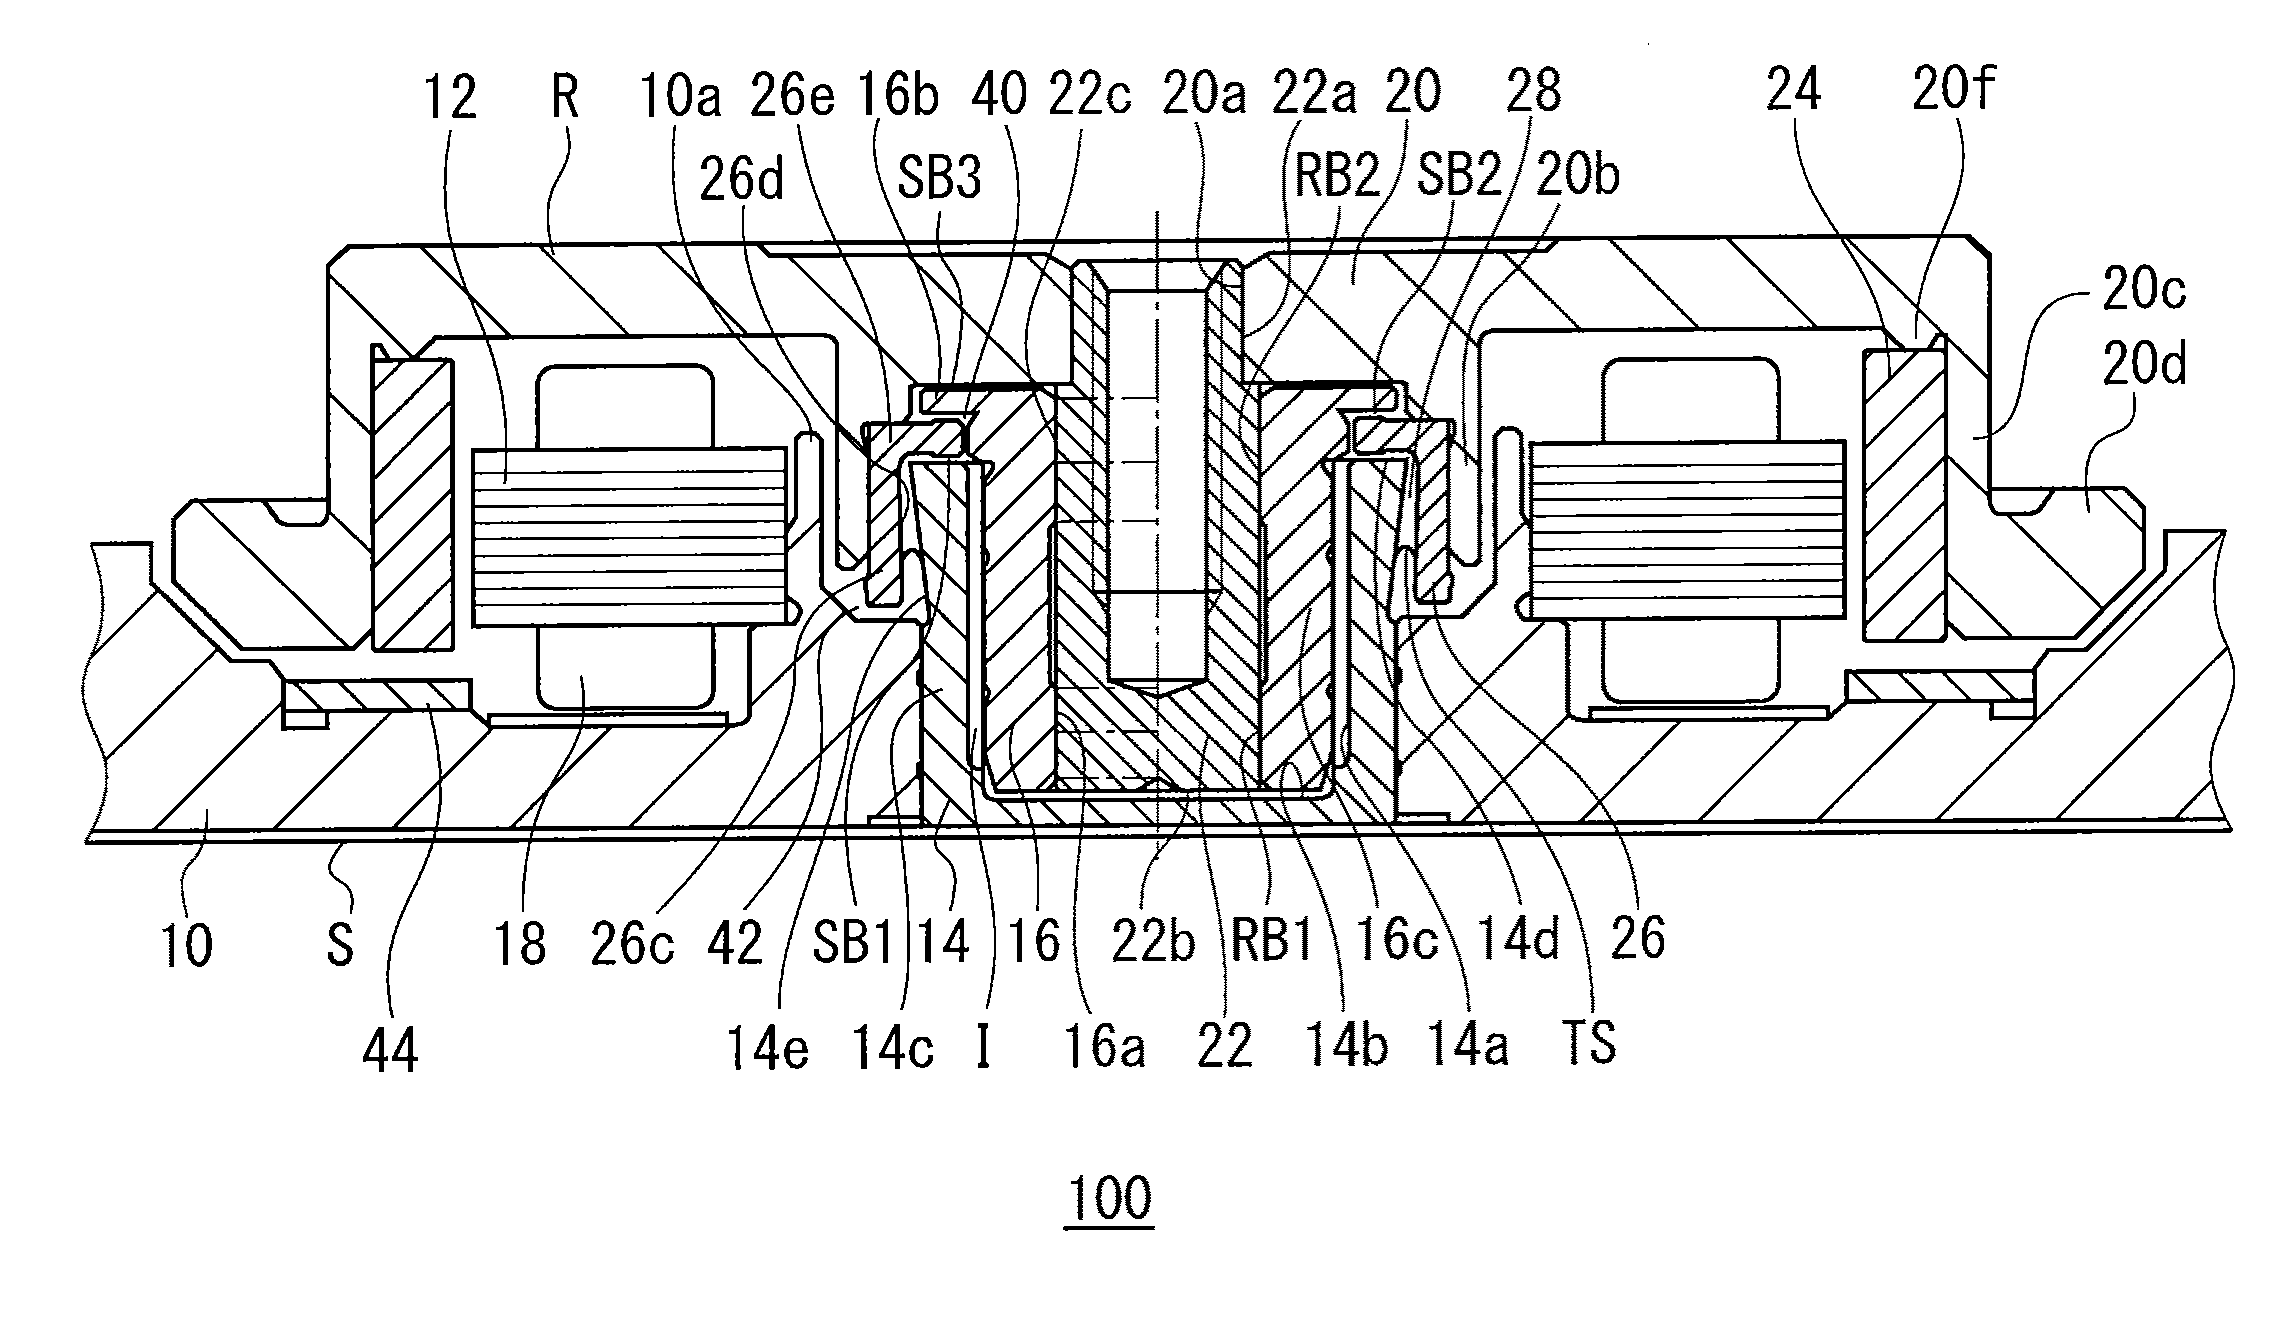 Disk drive device improved in Anti-vibration characteristic